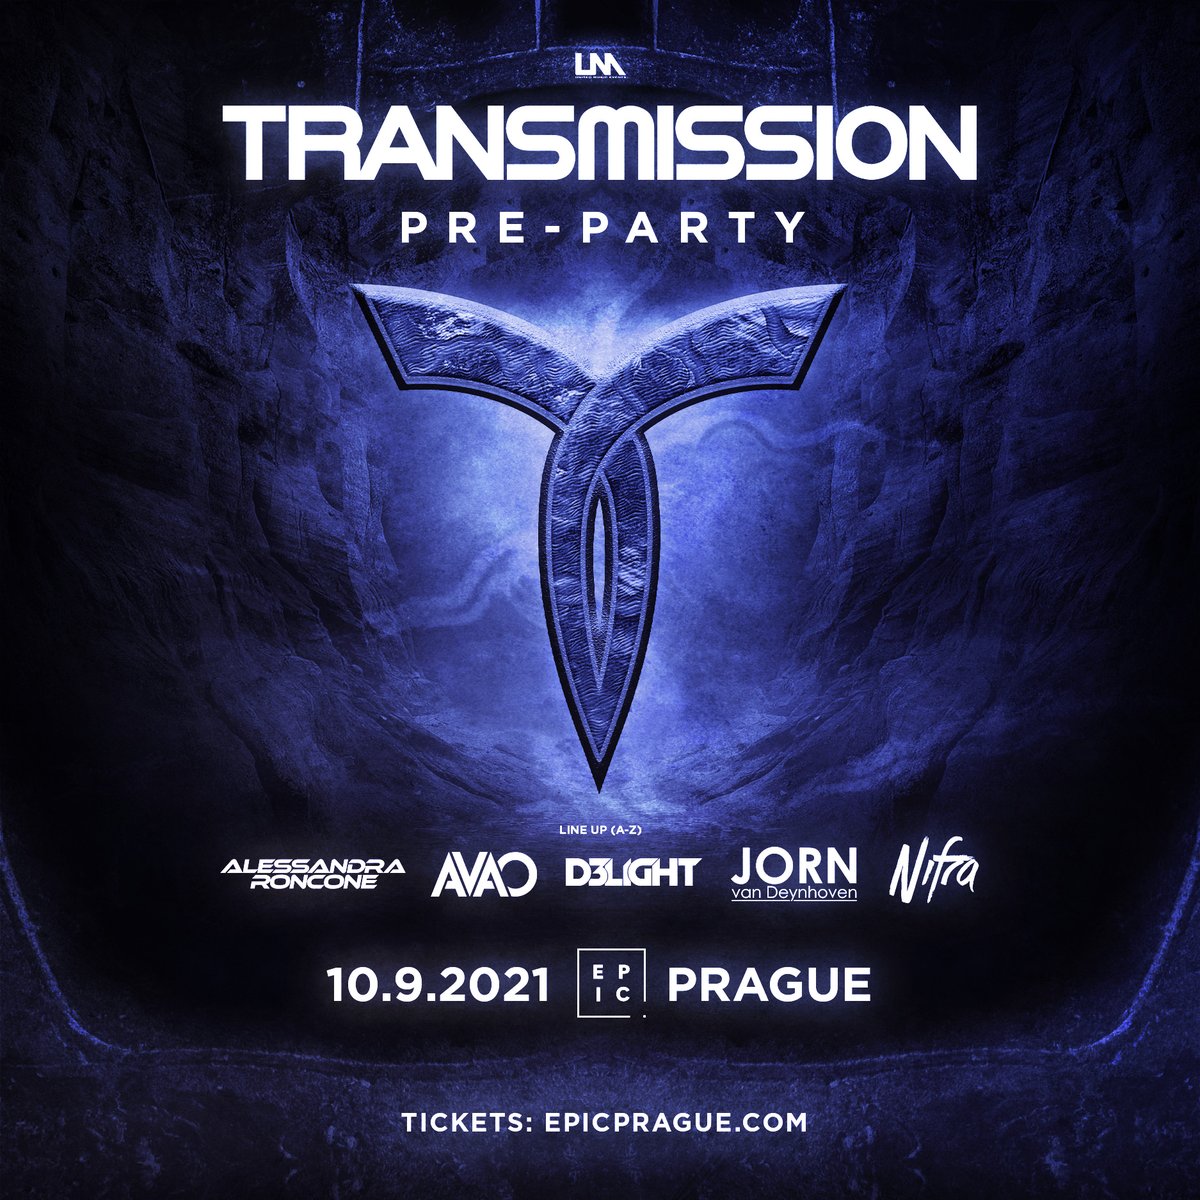 Official 𝐓𝐑𝐀𝐍𝐒𝐌𝐈𝐒𝐒𝐈𝐎𝐍 pre-party at #EPIC club in #Prague on 10th SEP. The best way to start your weekend! ⭐ LINE UP (A-Z): Alessandra @RonconeOfficial, @AvaoMusic, D3light, Jorn @vandeynhoven, @Nifra ⭐ TICKETS on sale now ➡️ tickets.epicprague.com